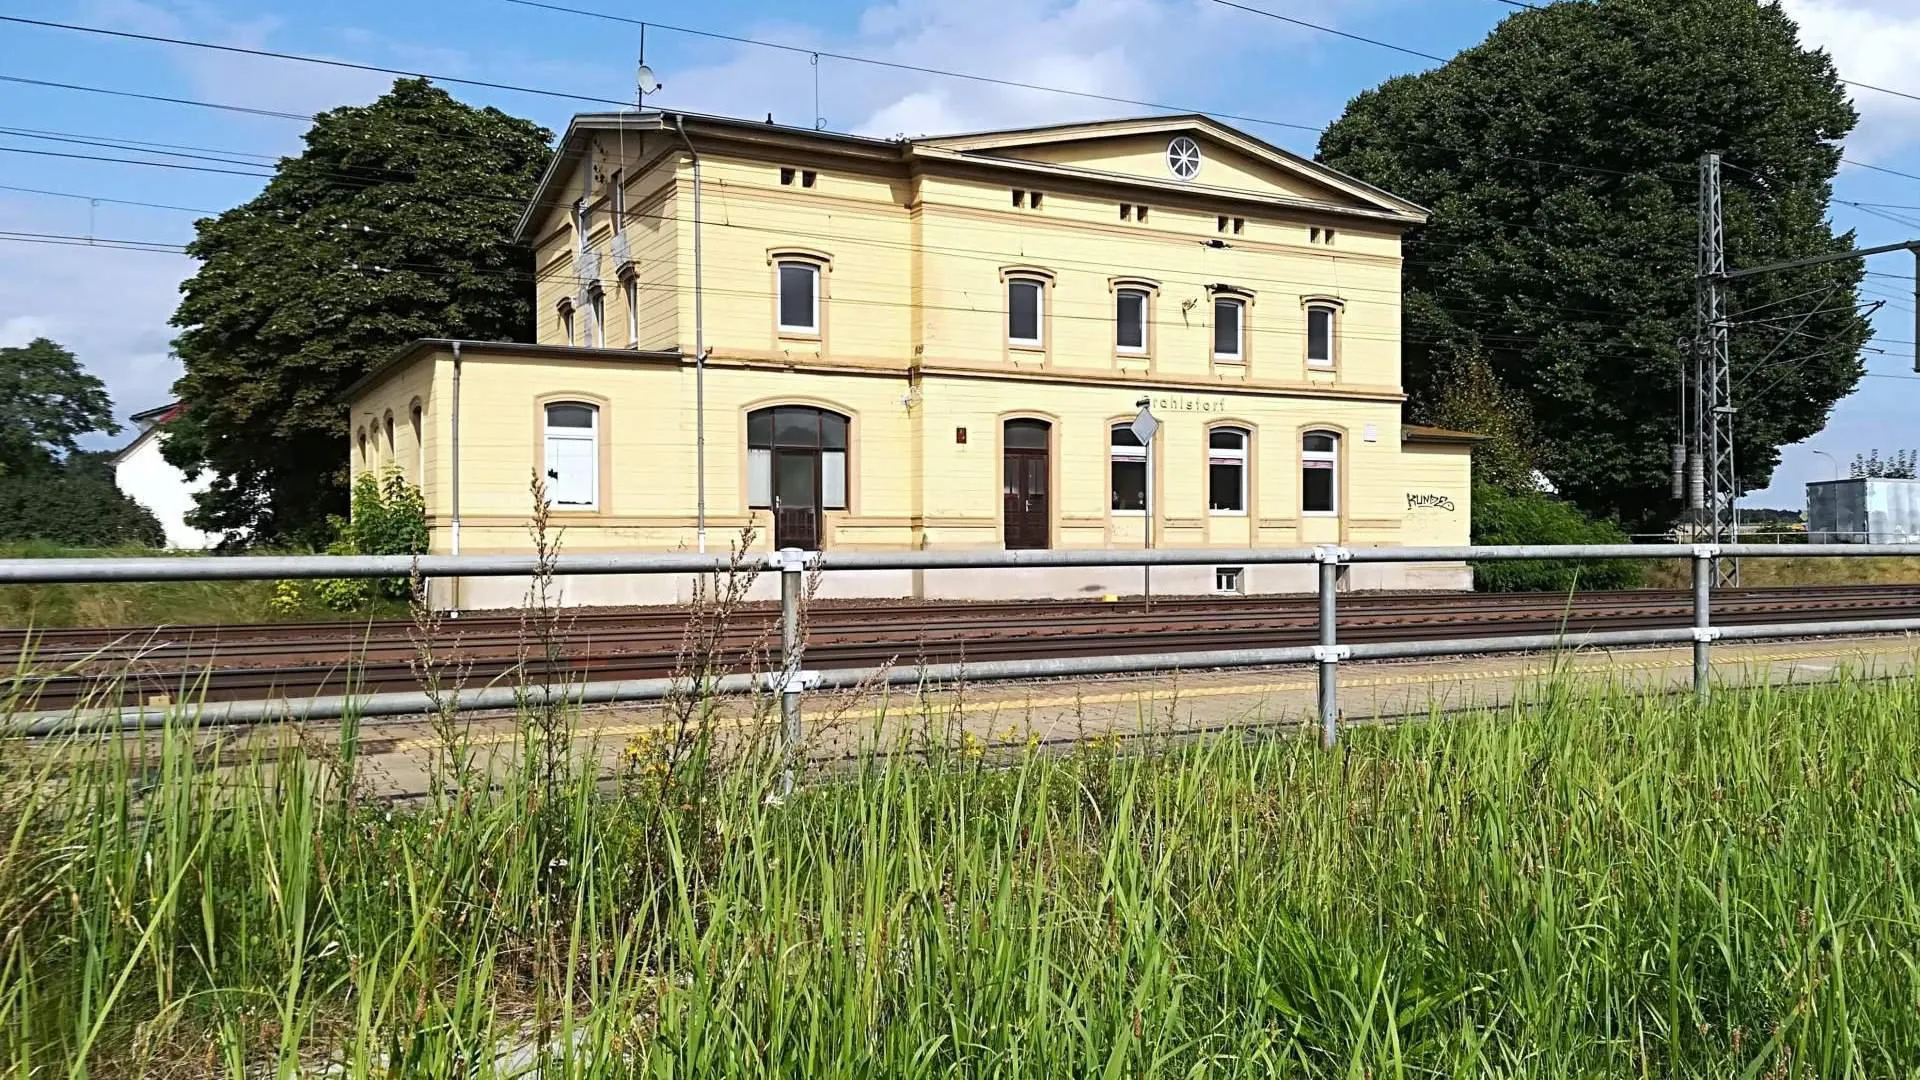 Photo showing: Brahlstorf railway station